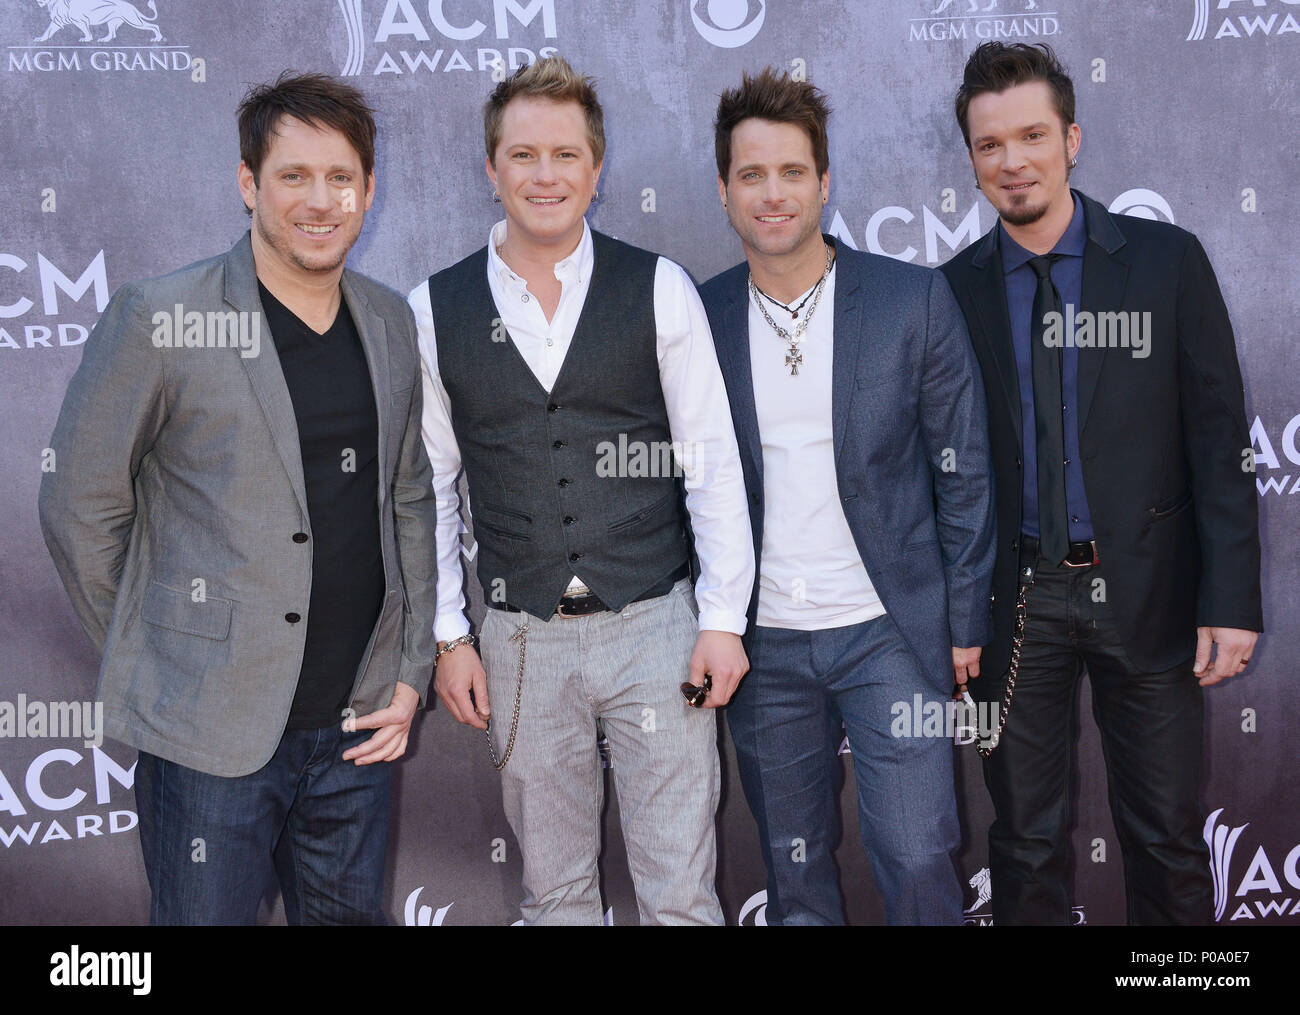 Parmalee at the  ACM Awards 2014 at the MGM Grand in Las Vegas.Parmalee  Event in Hollywood Life - California, Red Carpet Event, USA, Film Industry, Celebrities, Photography, Bestof, Arts Culture and Entertainment, Topix Celebrities fashion, Best of, Hollywood Life, Event in Hollywood Life - California, Red Carpet and backstage, ,Arts Culture and Entertainment, Photography,    inquiry tsuni@Gamma-USA.com ,  Music celebrities, Musician, Music Group, 2014 Stock Photo